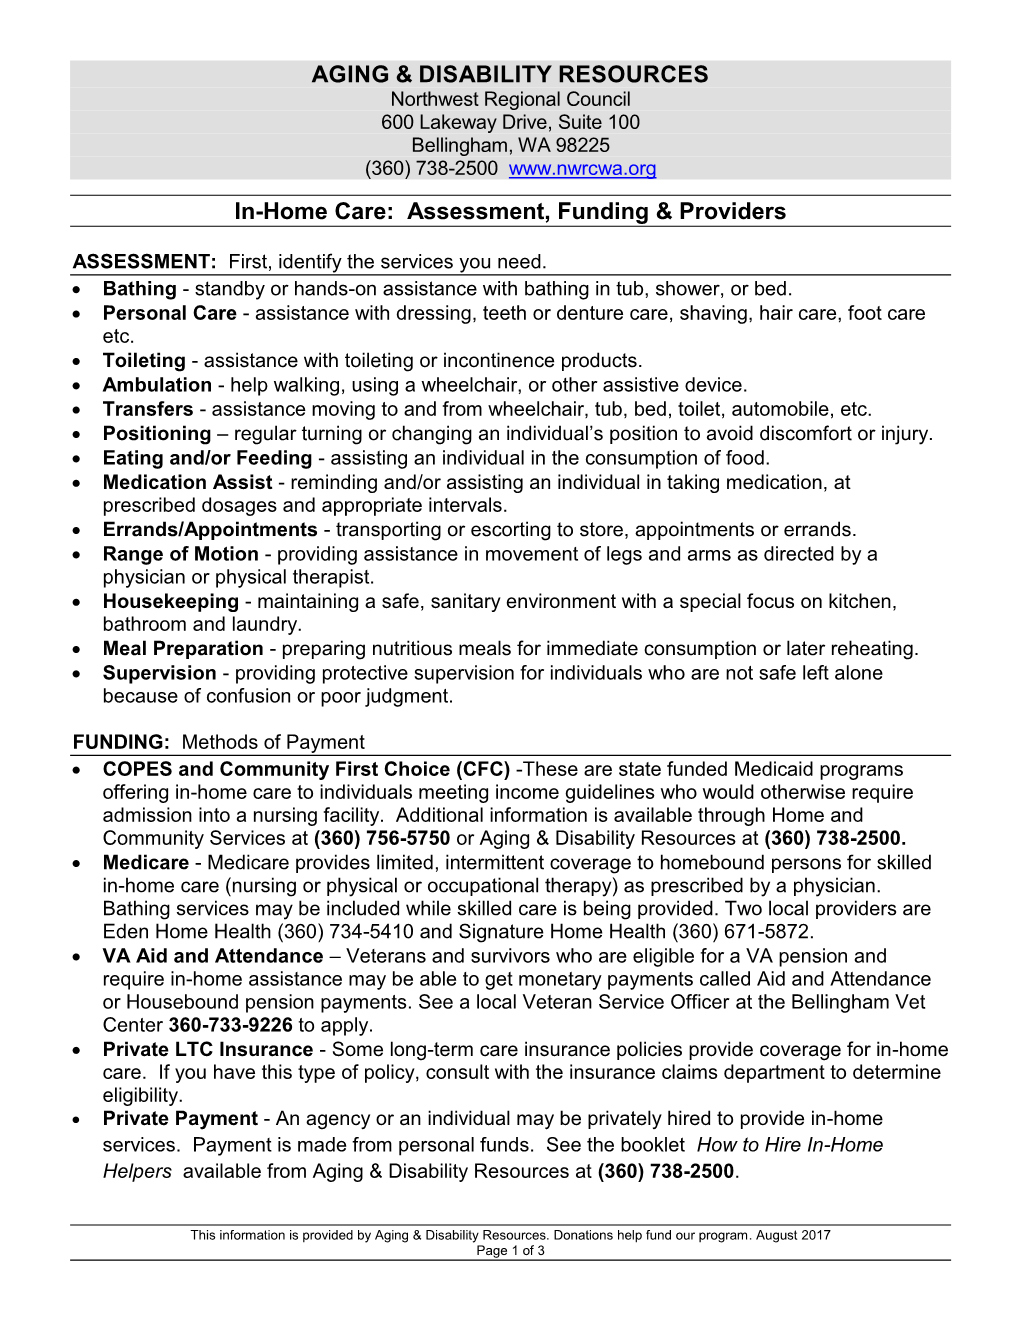 AGING & DISABILITY RESOURCES In-Home Care: Assessment, Funding